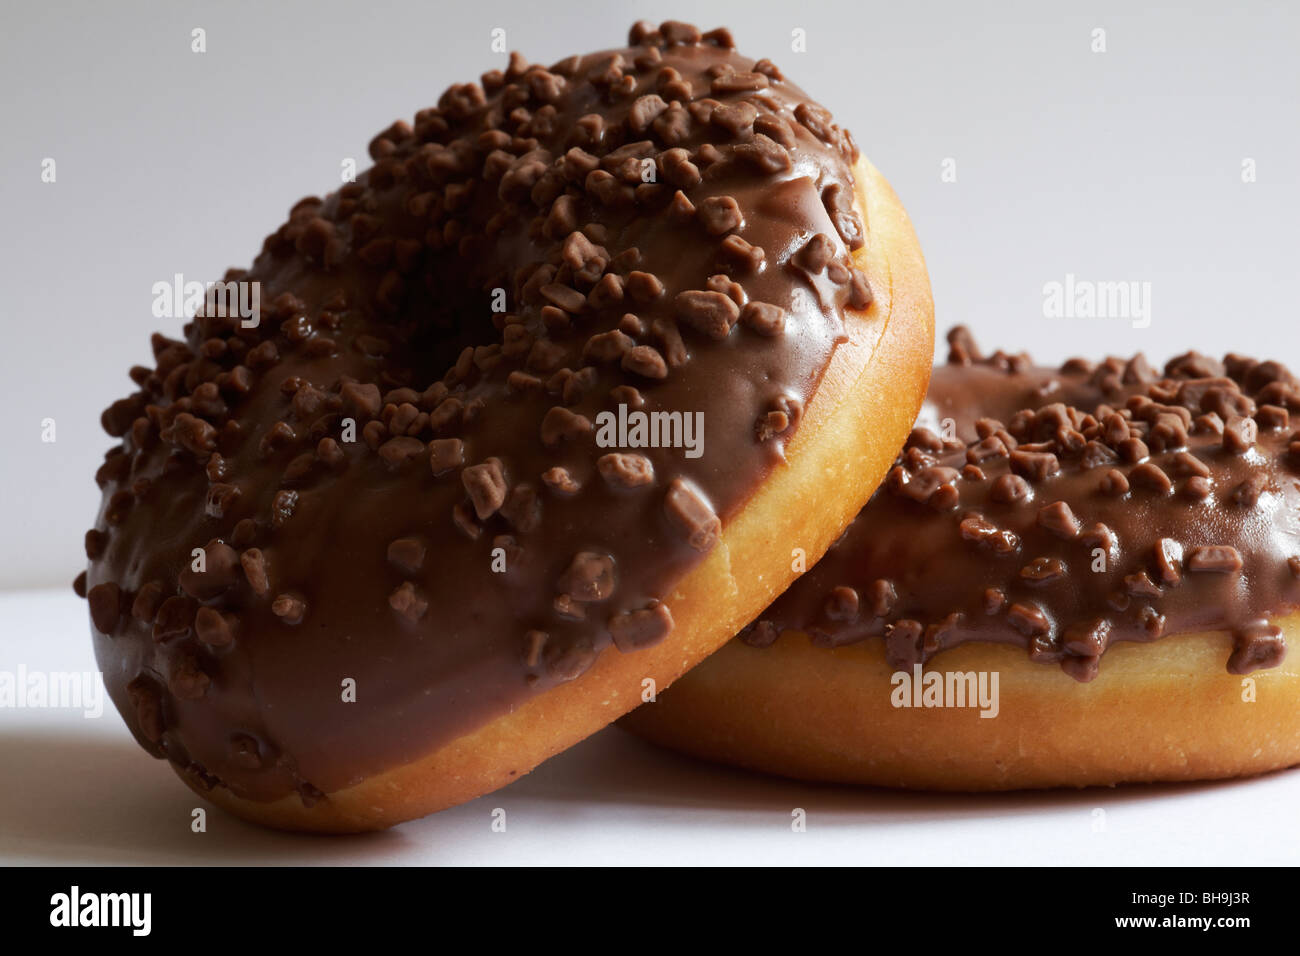 two chocolate ring donuts set against white background Stock Photo